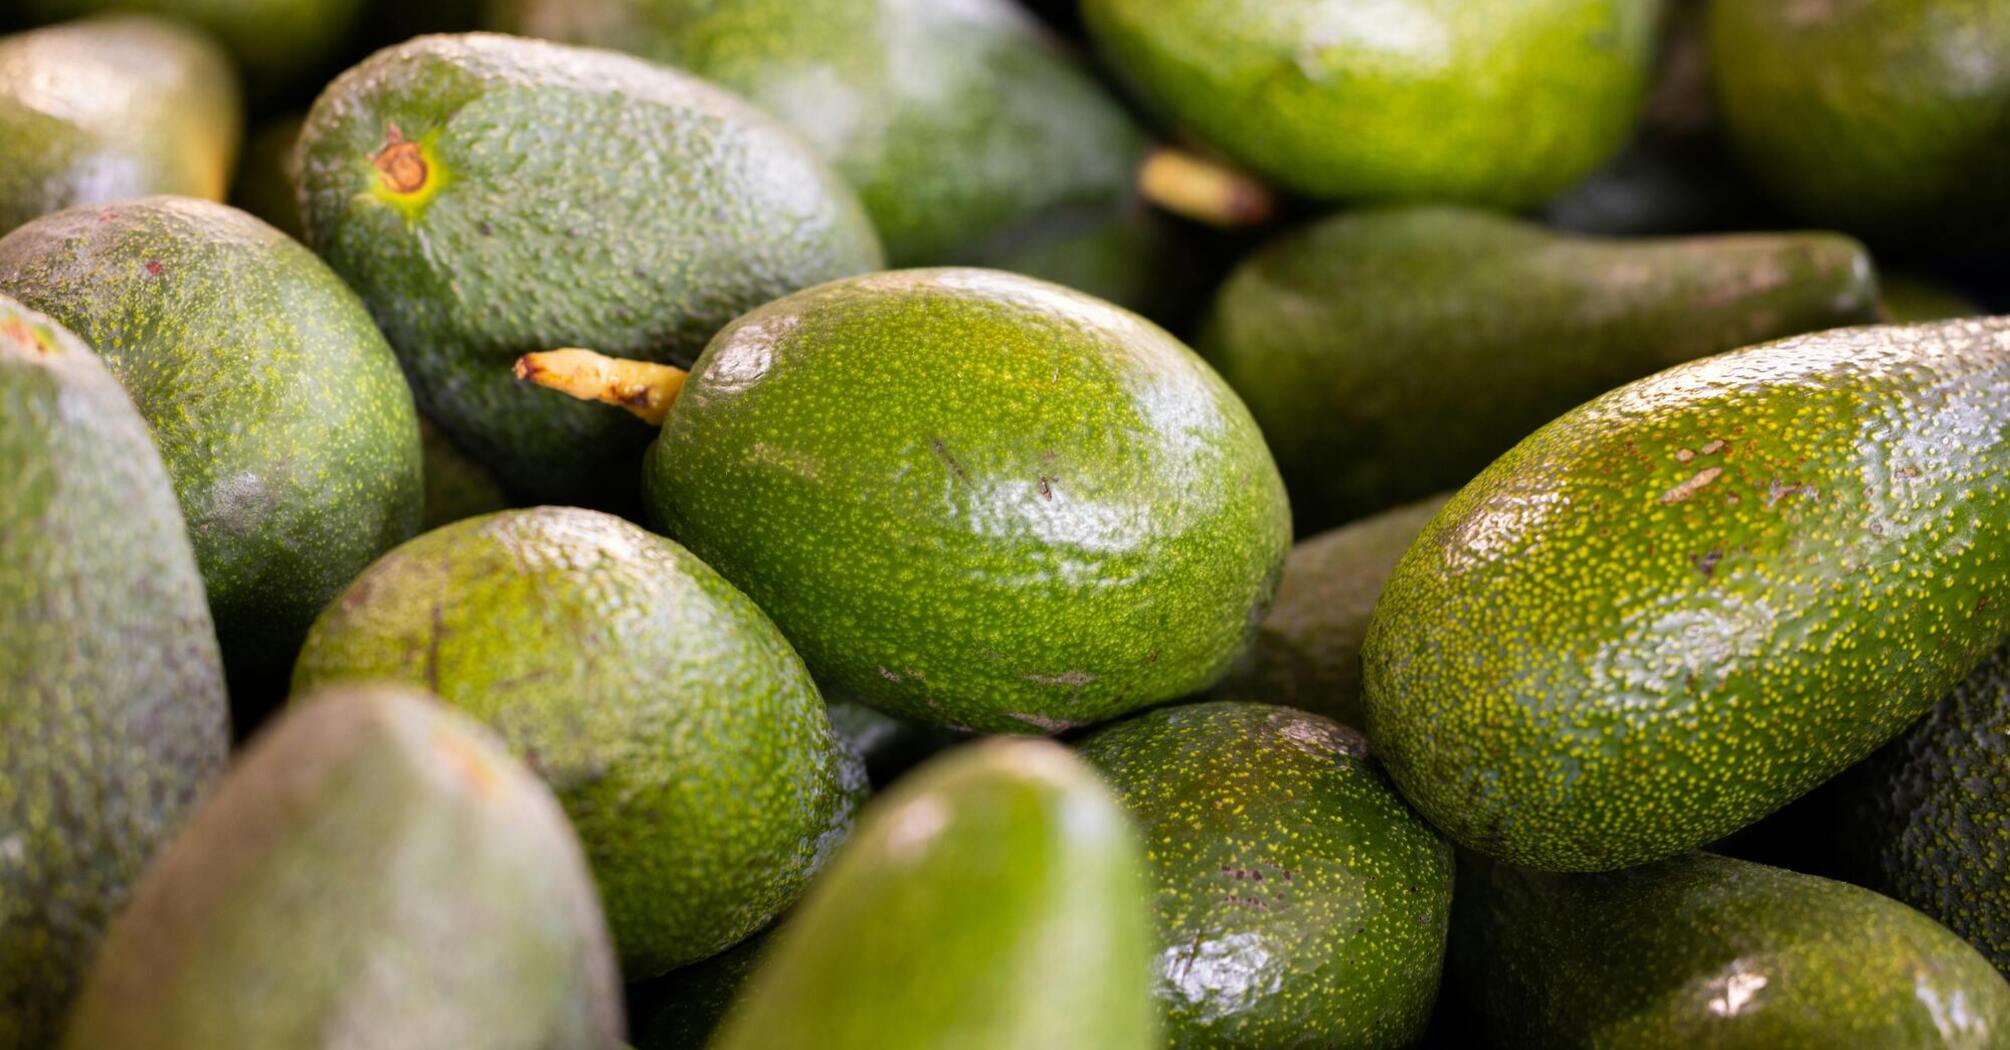 How to choose the perfect avocado?